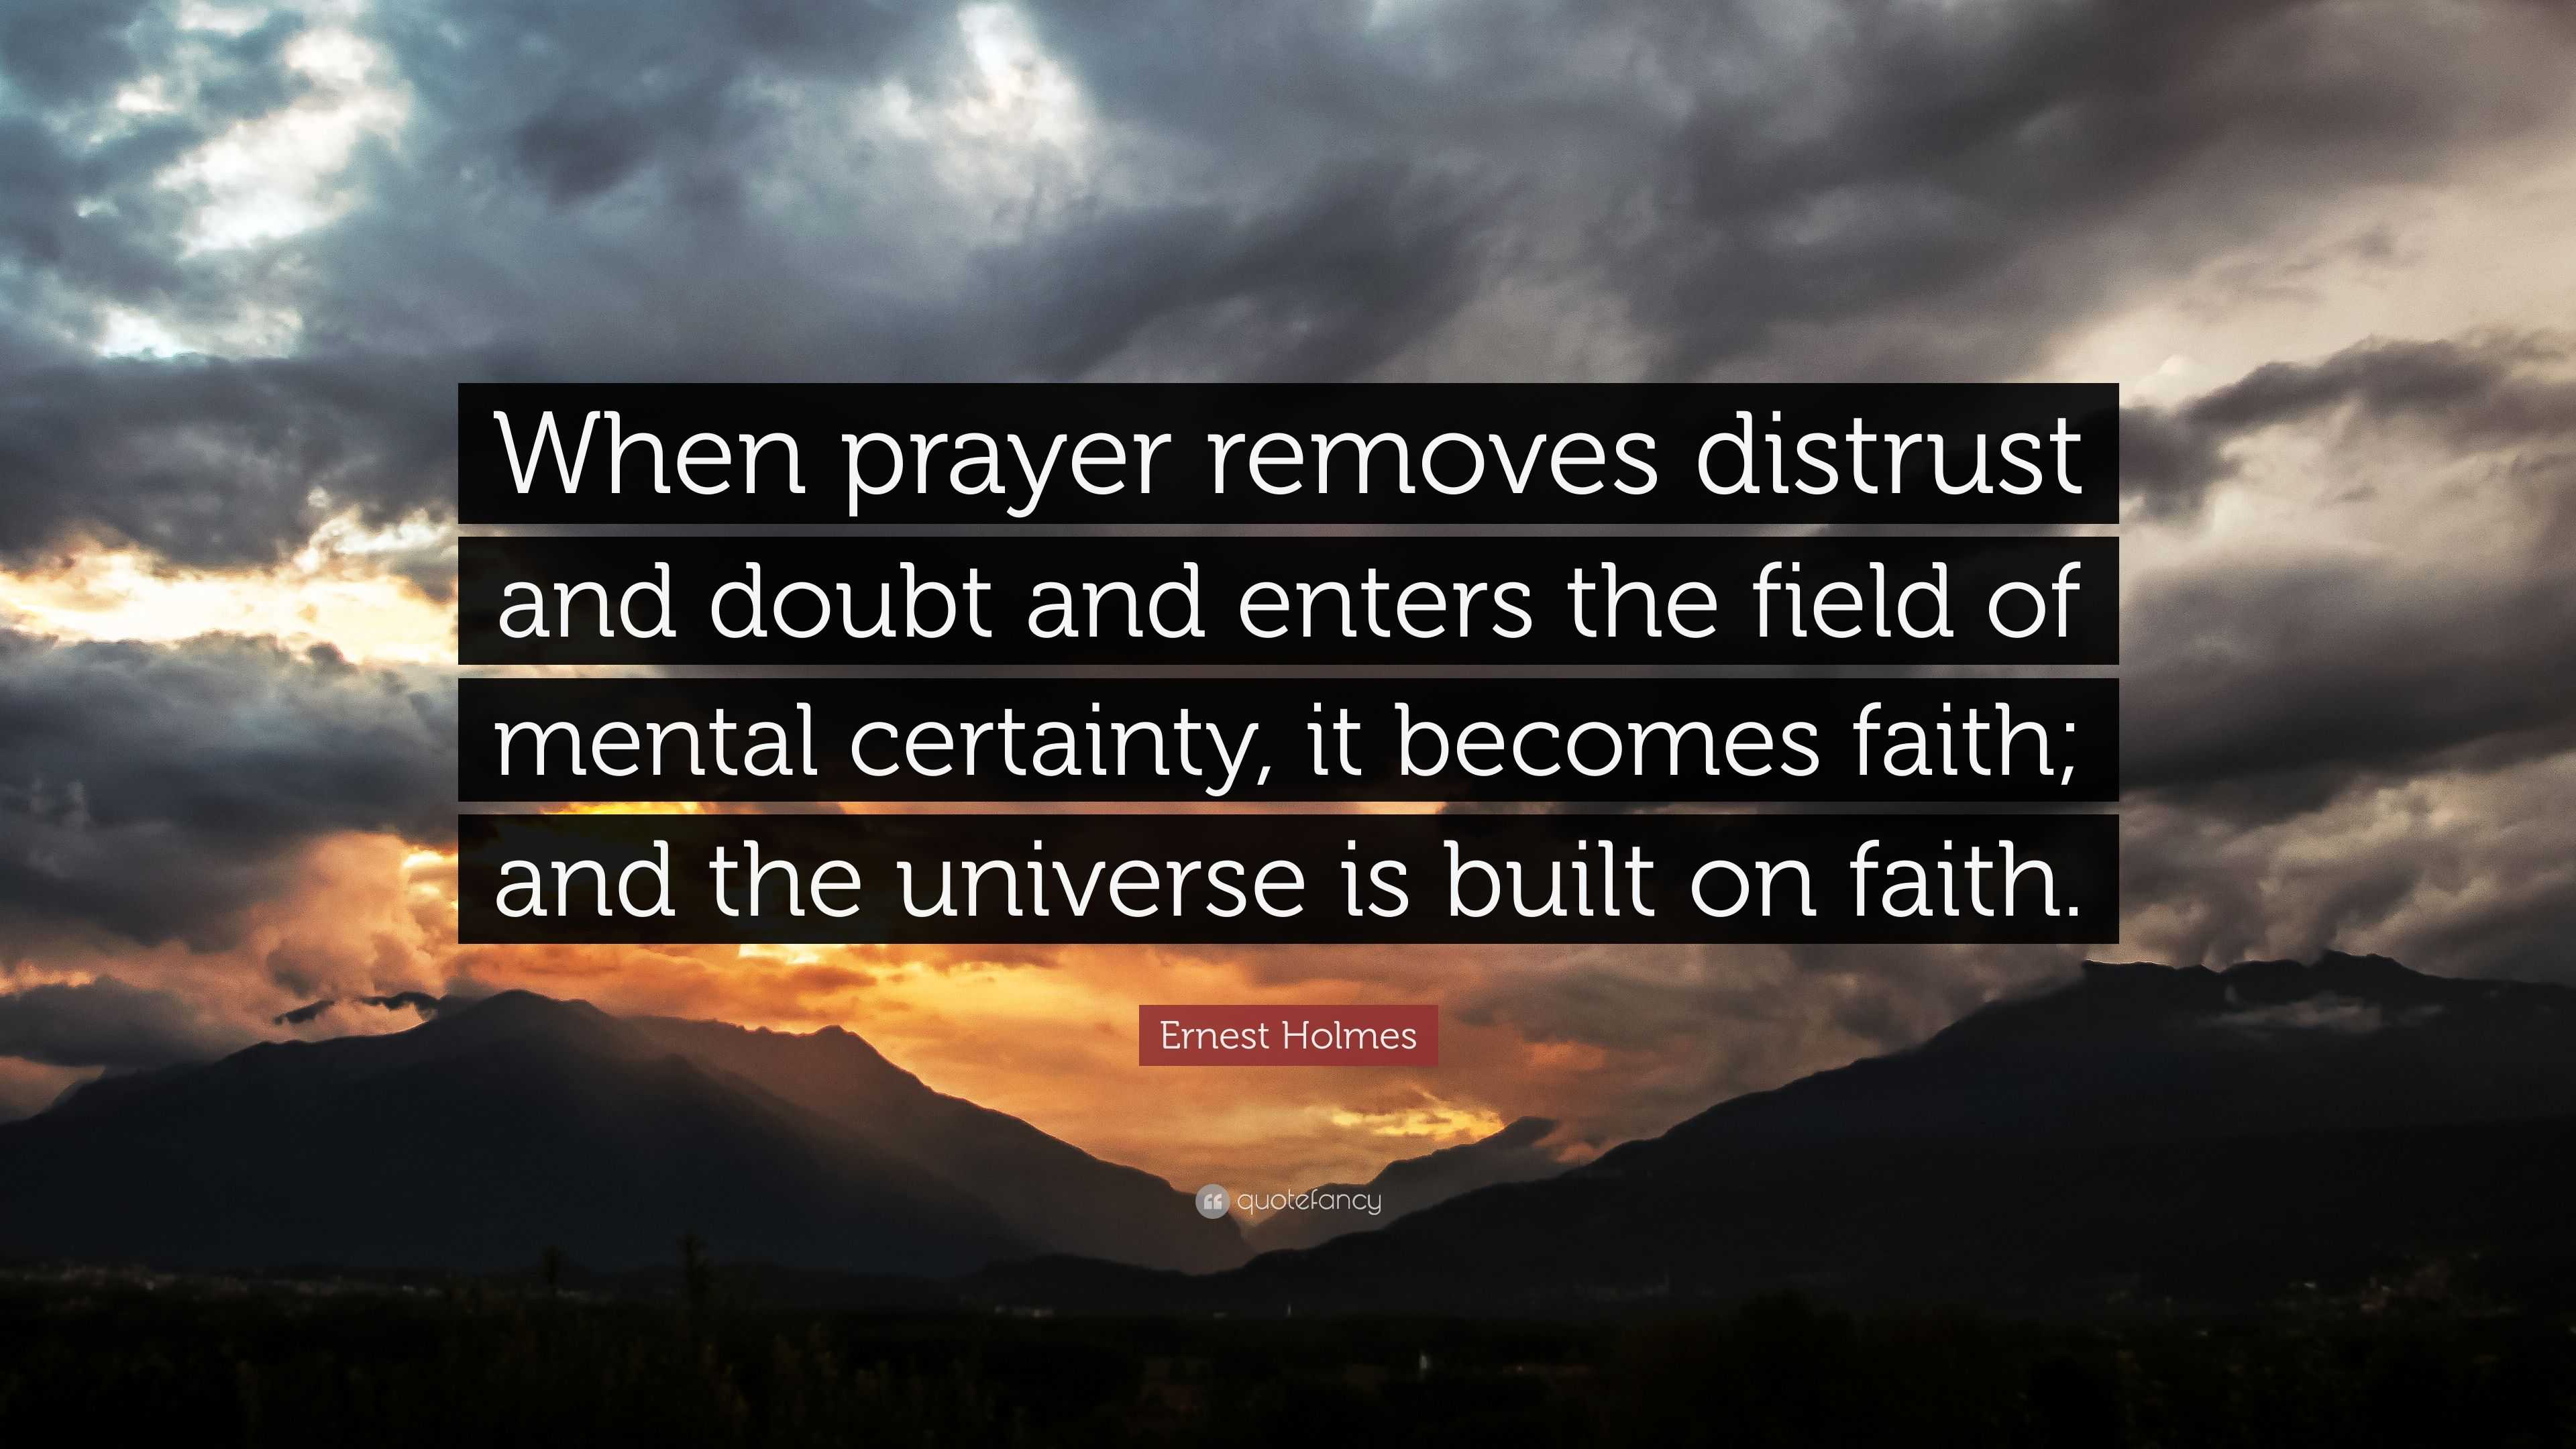 Ernest Holmes Quote: “When prayer removes distrust and doubt and enters ...